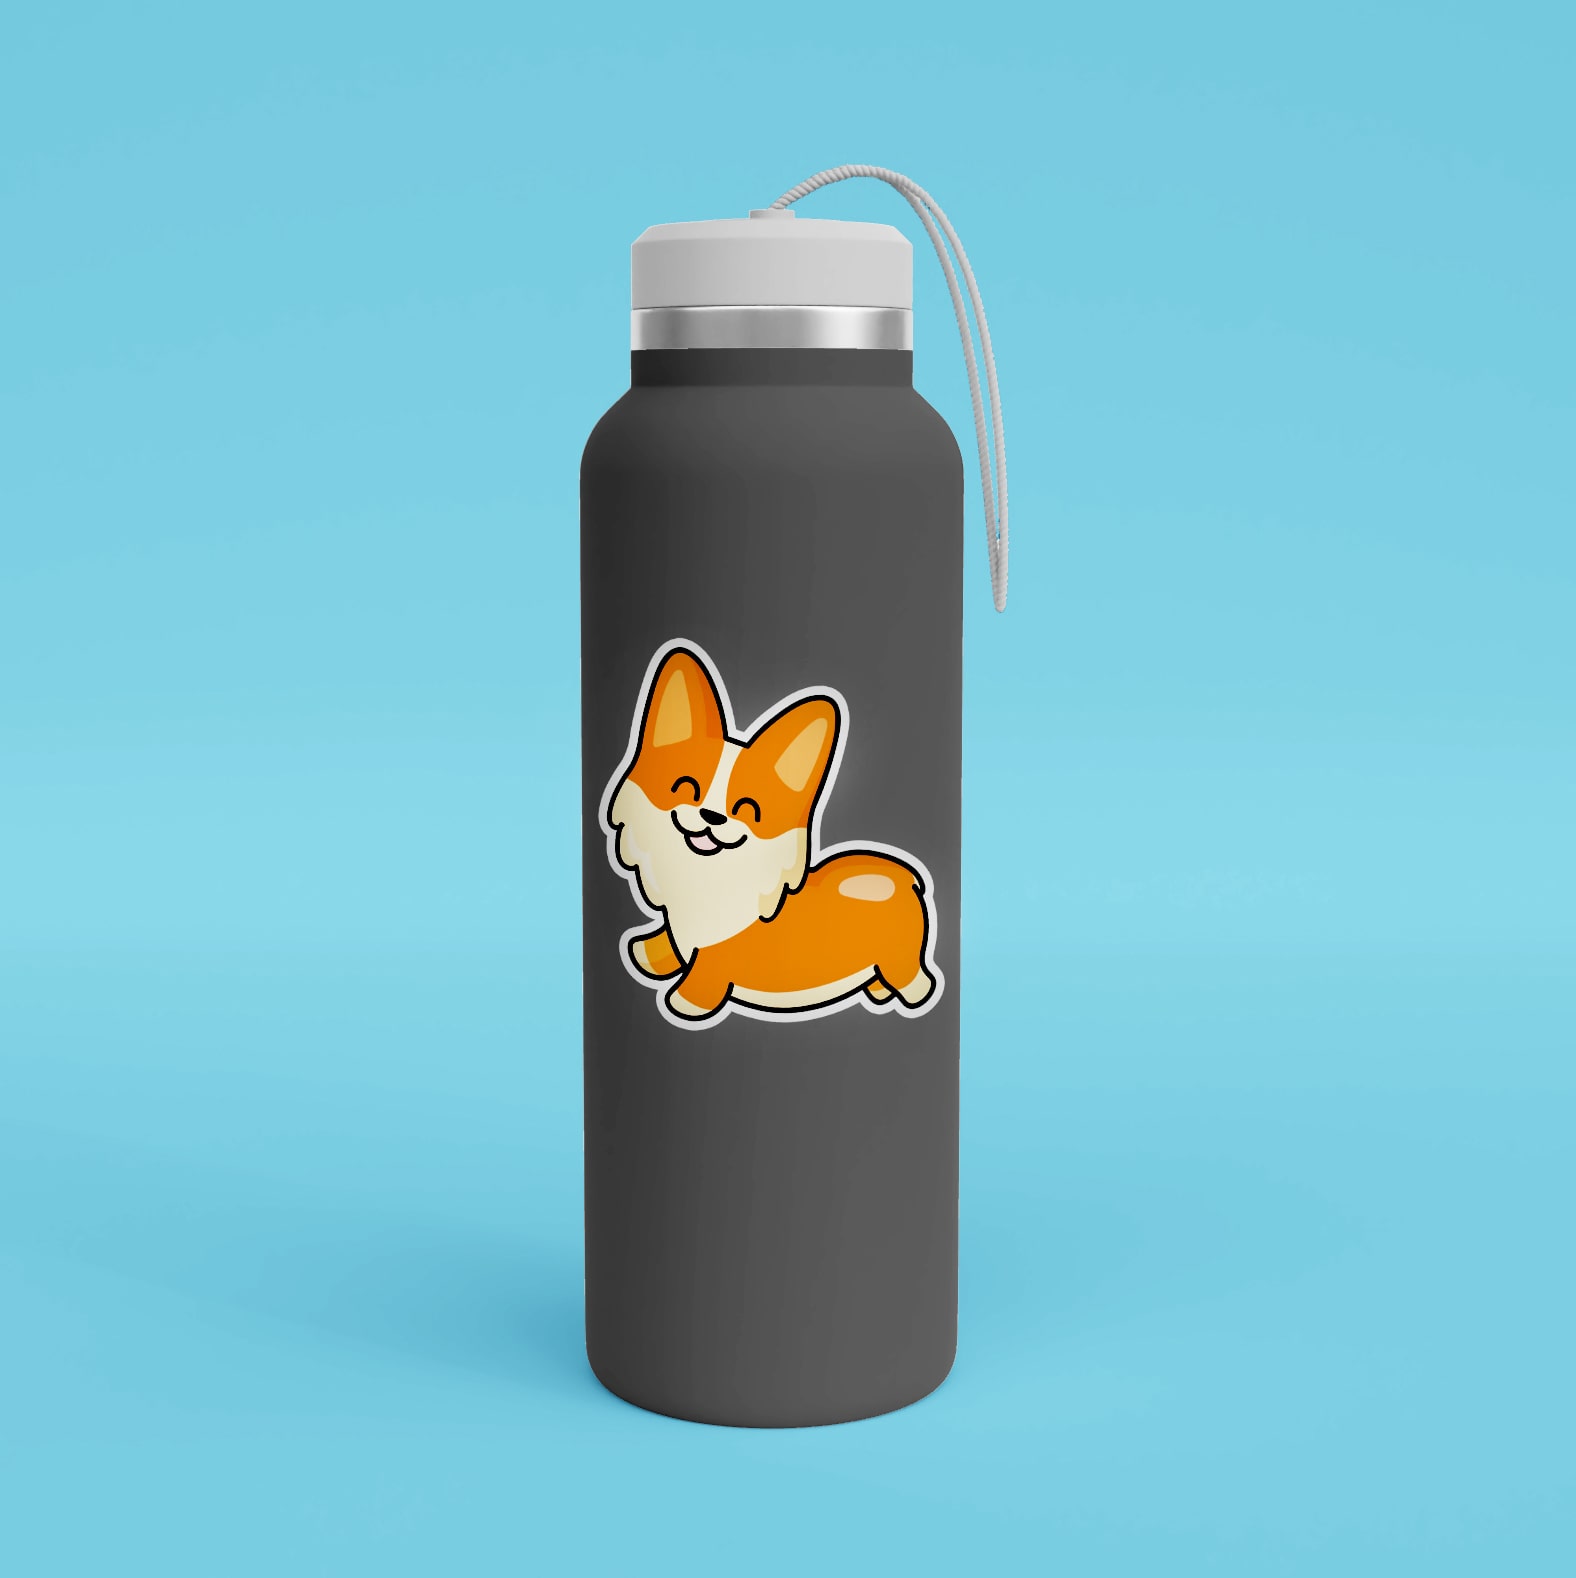 Hydro Flask Bottles & Stickers: The Ultimate Solution for Hydrating, Customized!